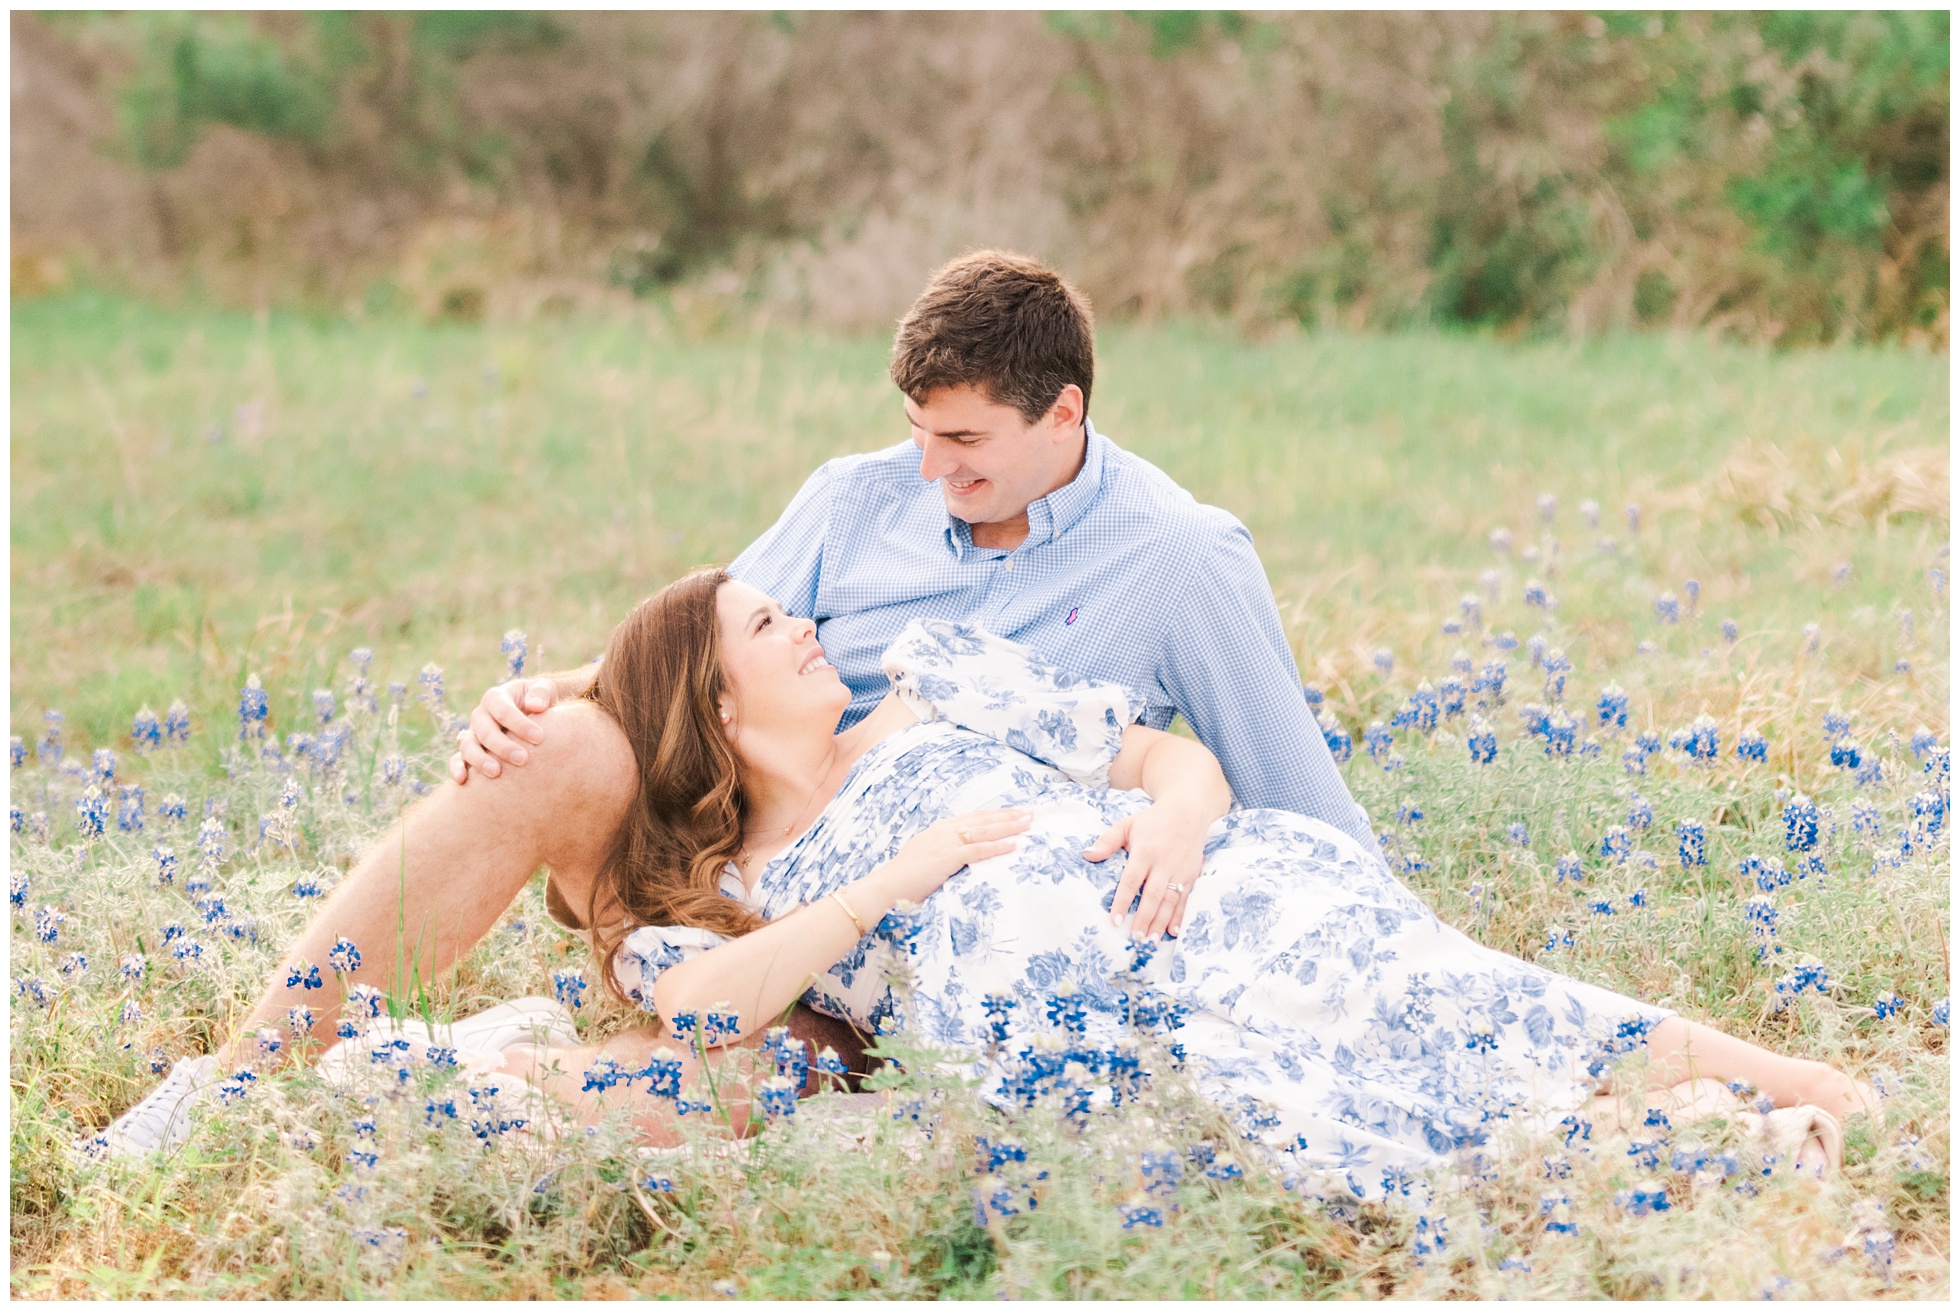 The Woodlands Newborn and Maternity Photographer